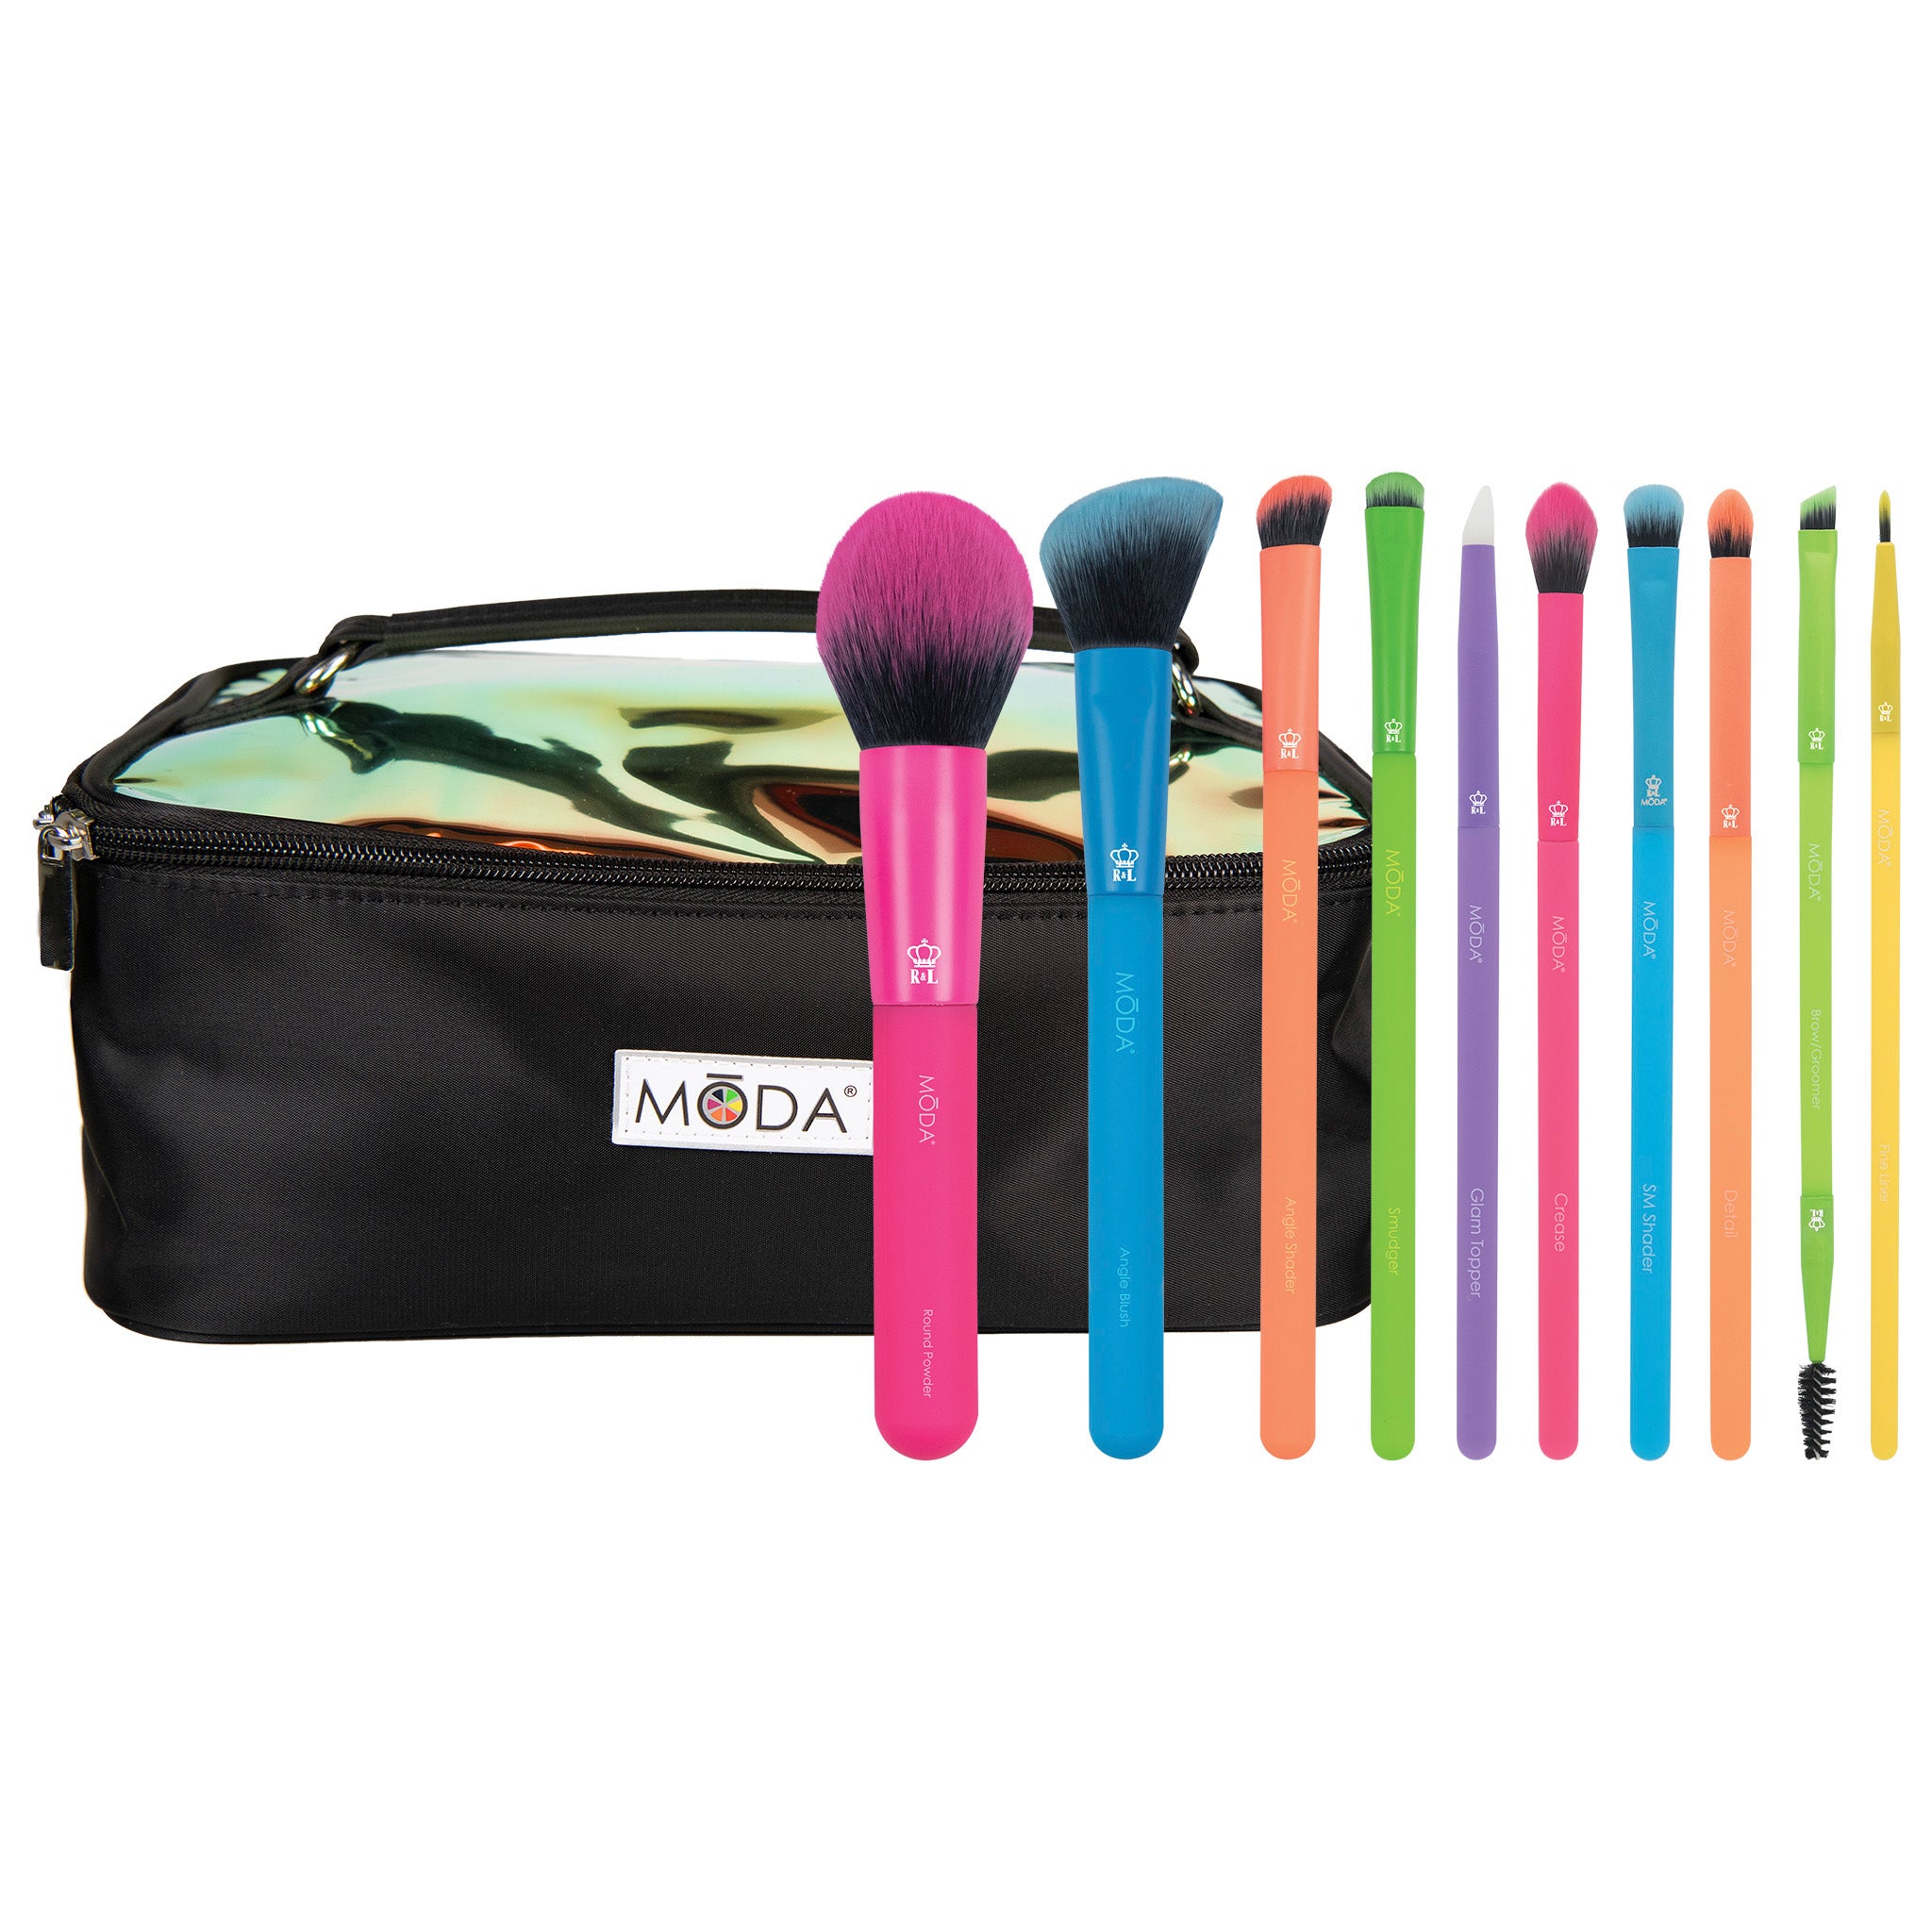 Collection of makeup products and brushes - Glamorous beauty